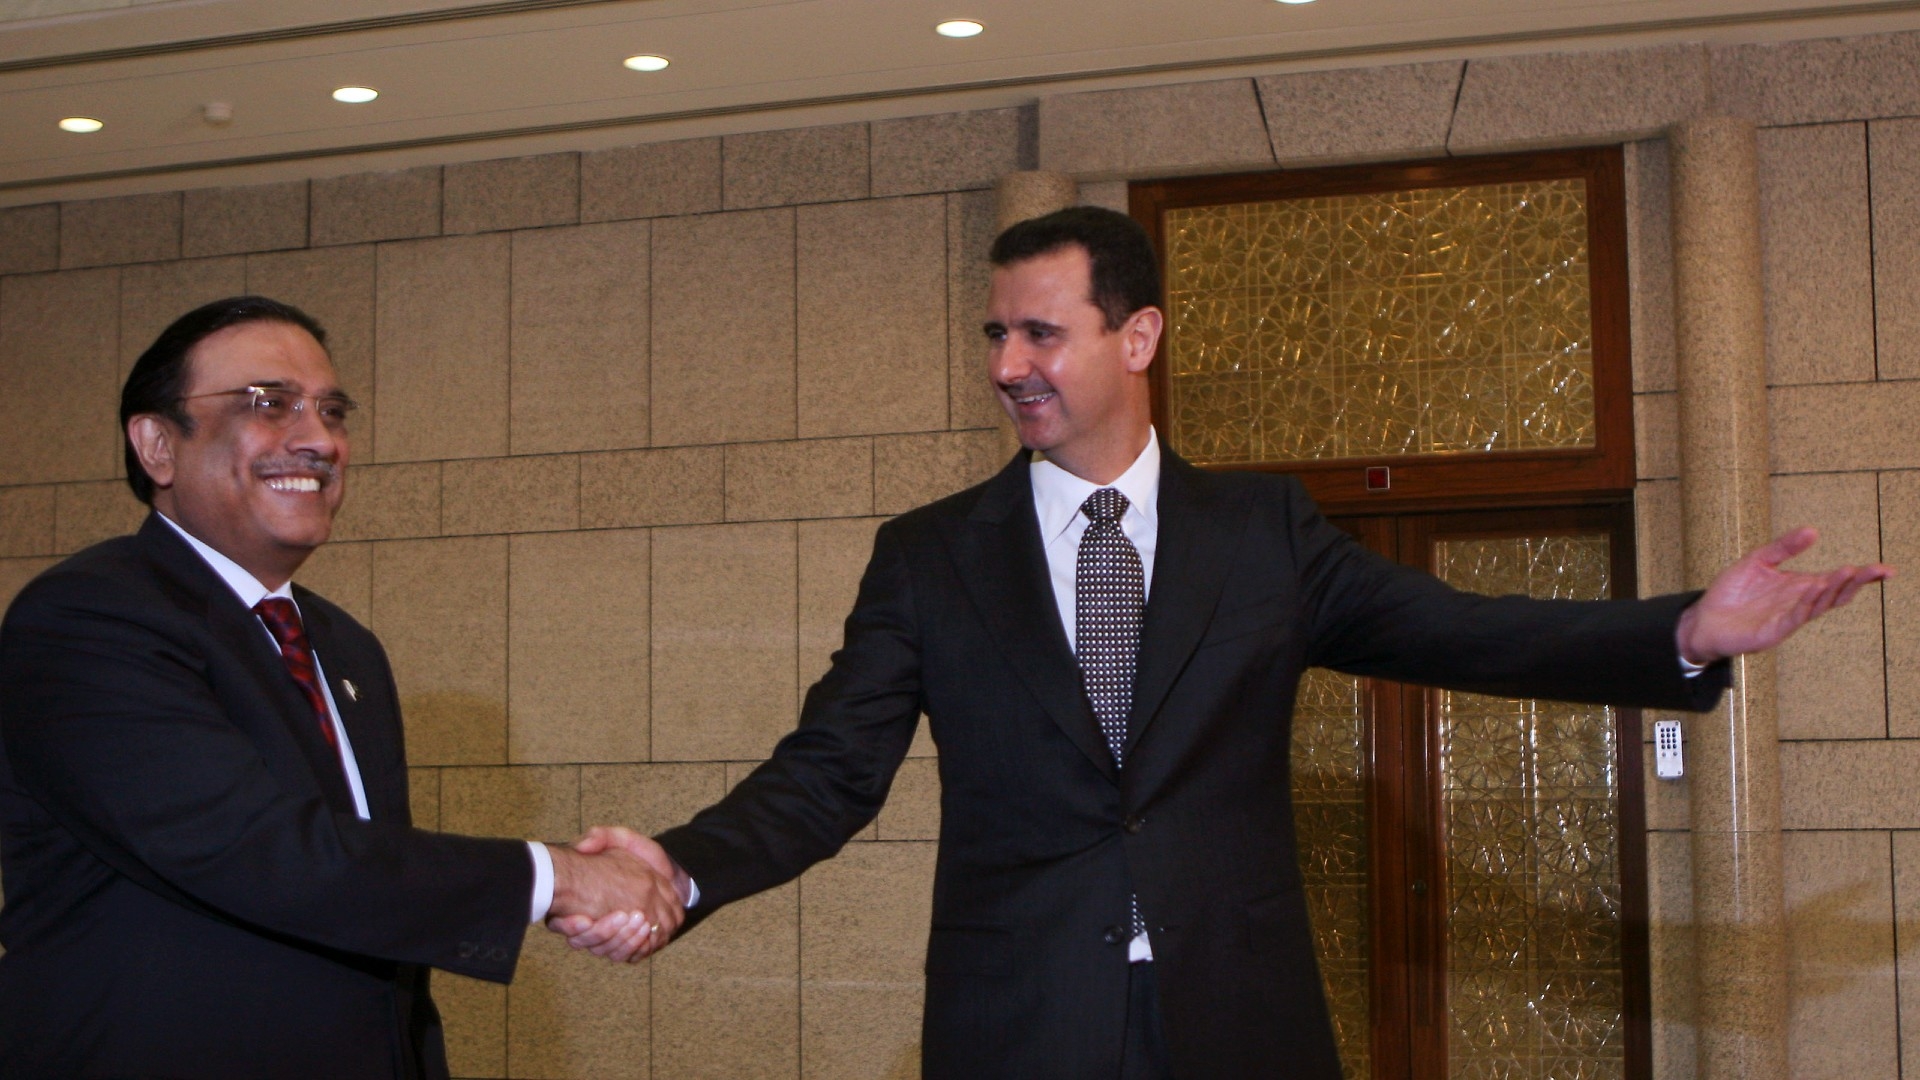 Syrian President Bashar Assad, right, welcomes his then-Pakistani counterpart Asif Ali Zardari at the presidential palace in Damascus in 2010 (AP)